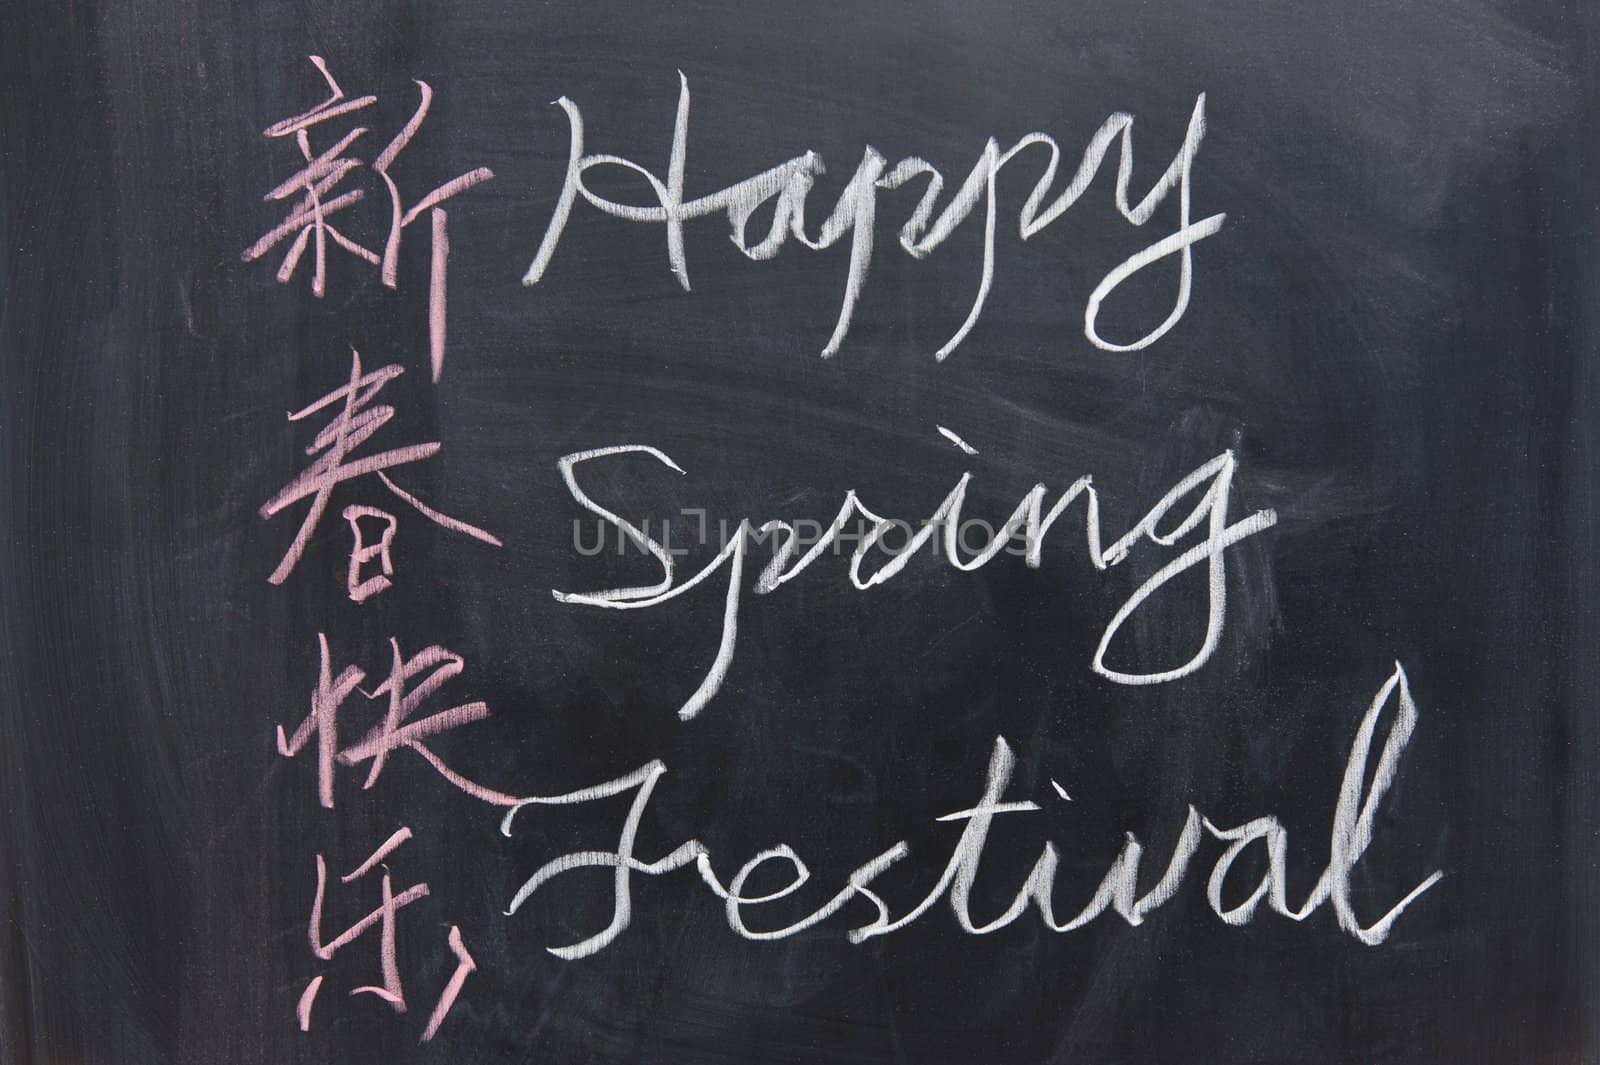 Chalkboard writing - "Happy Spring Festival" blessing in both English and Chinese